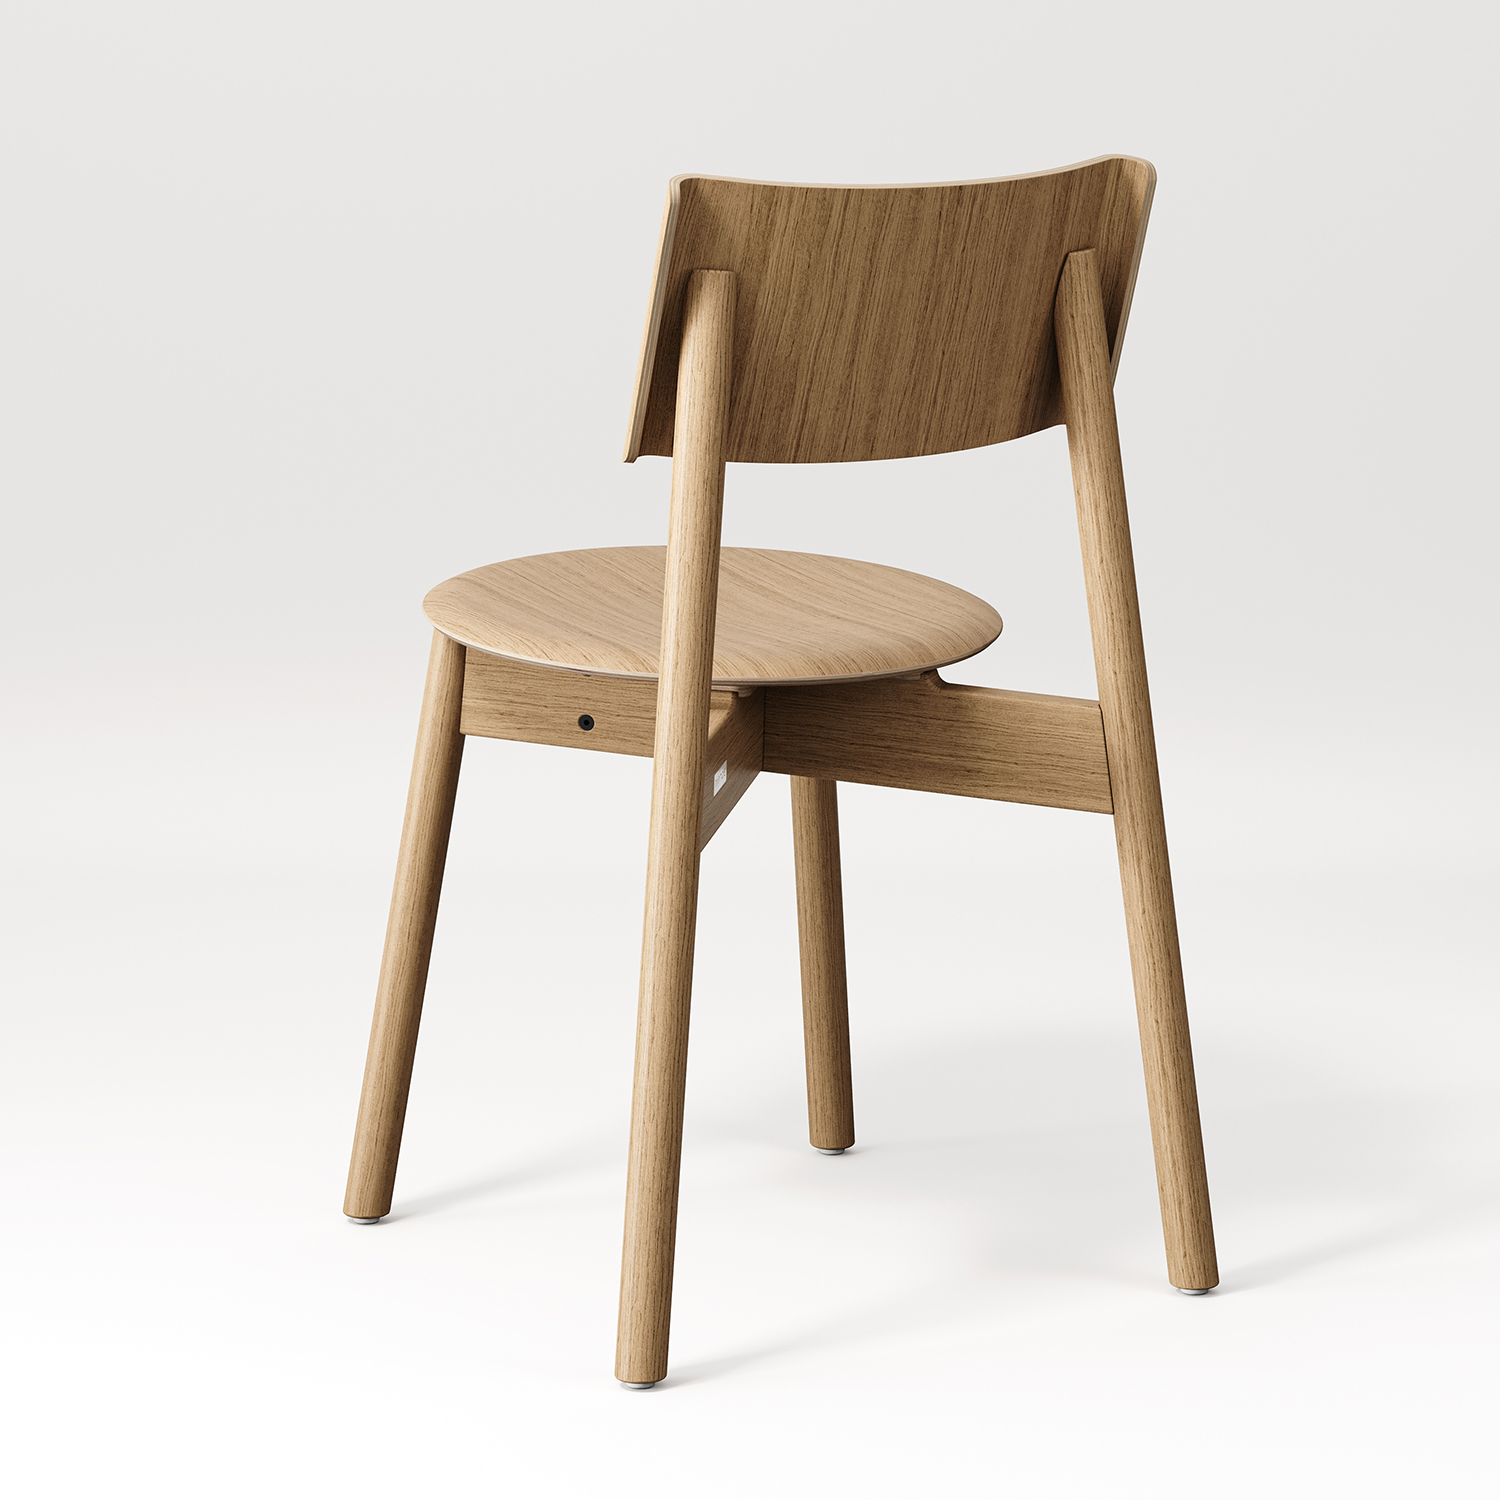 SSD full wood chair - eco-certified wood